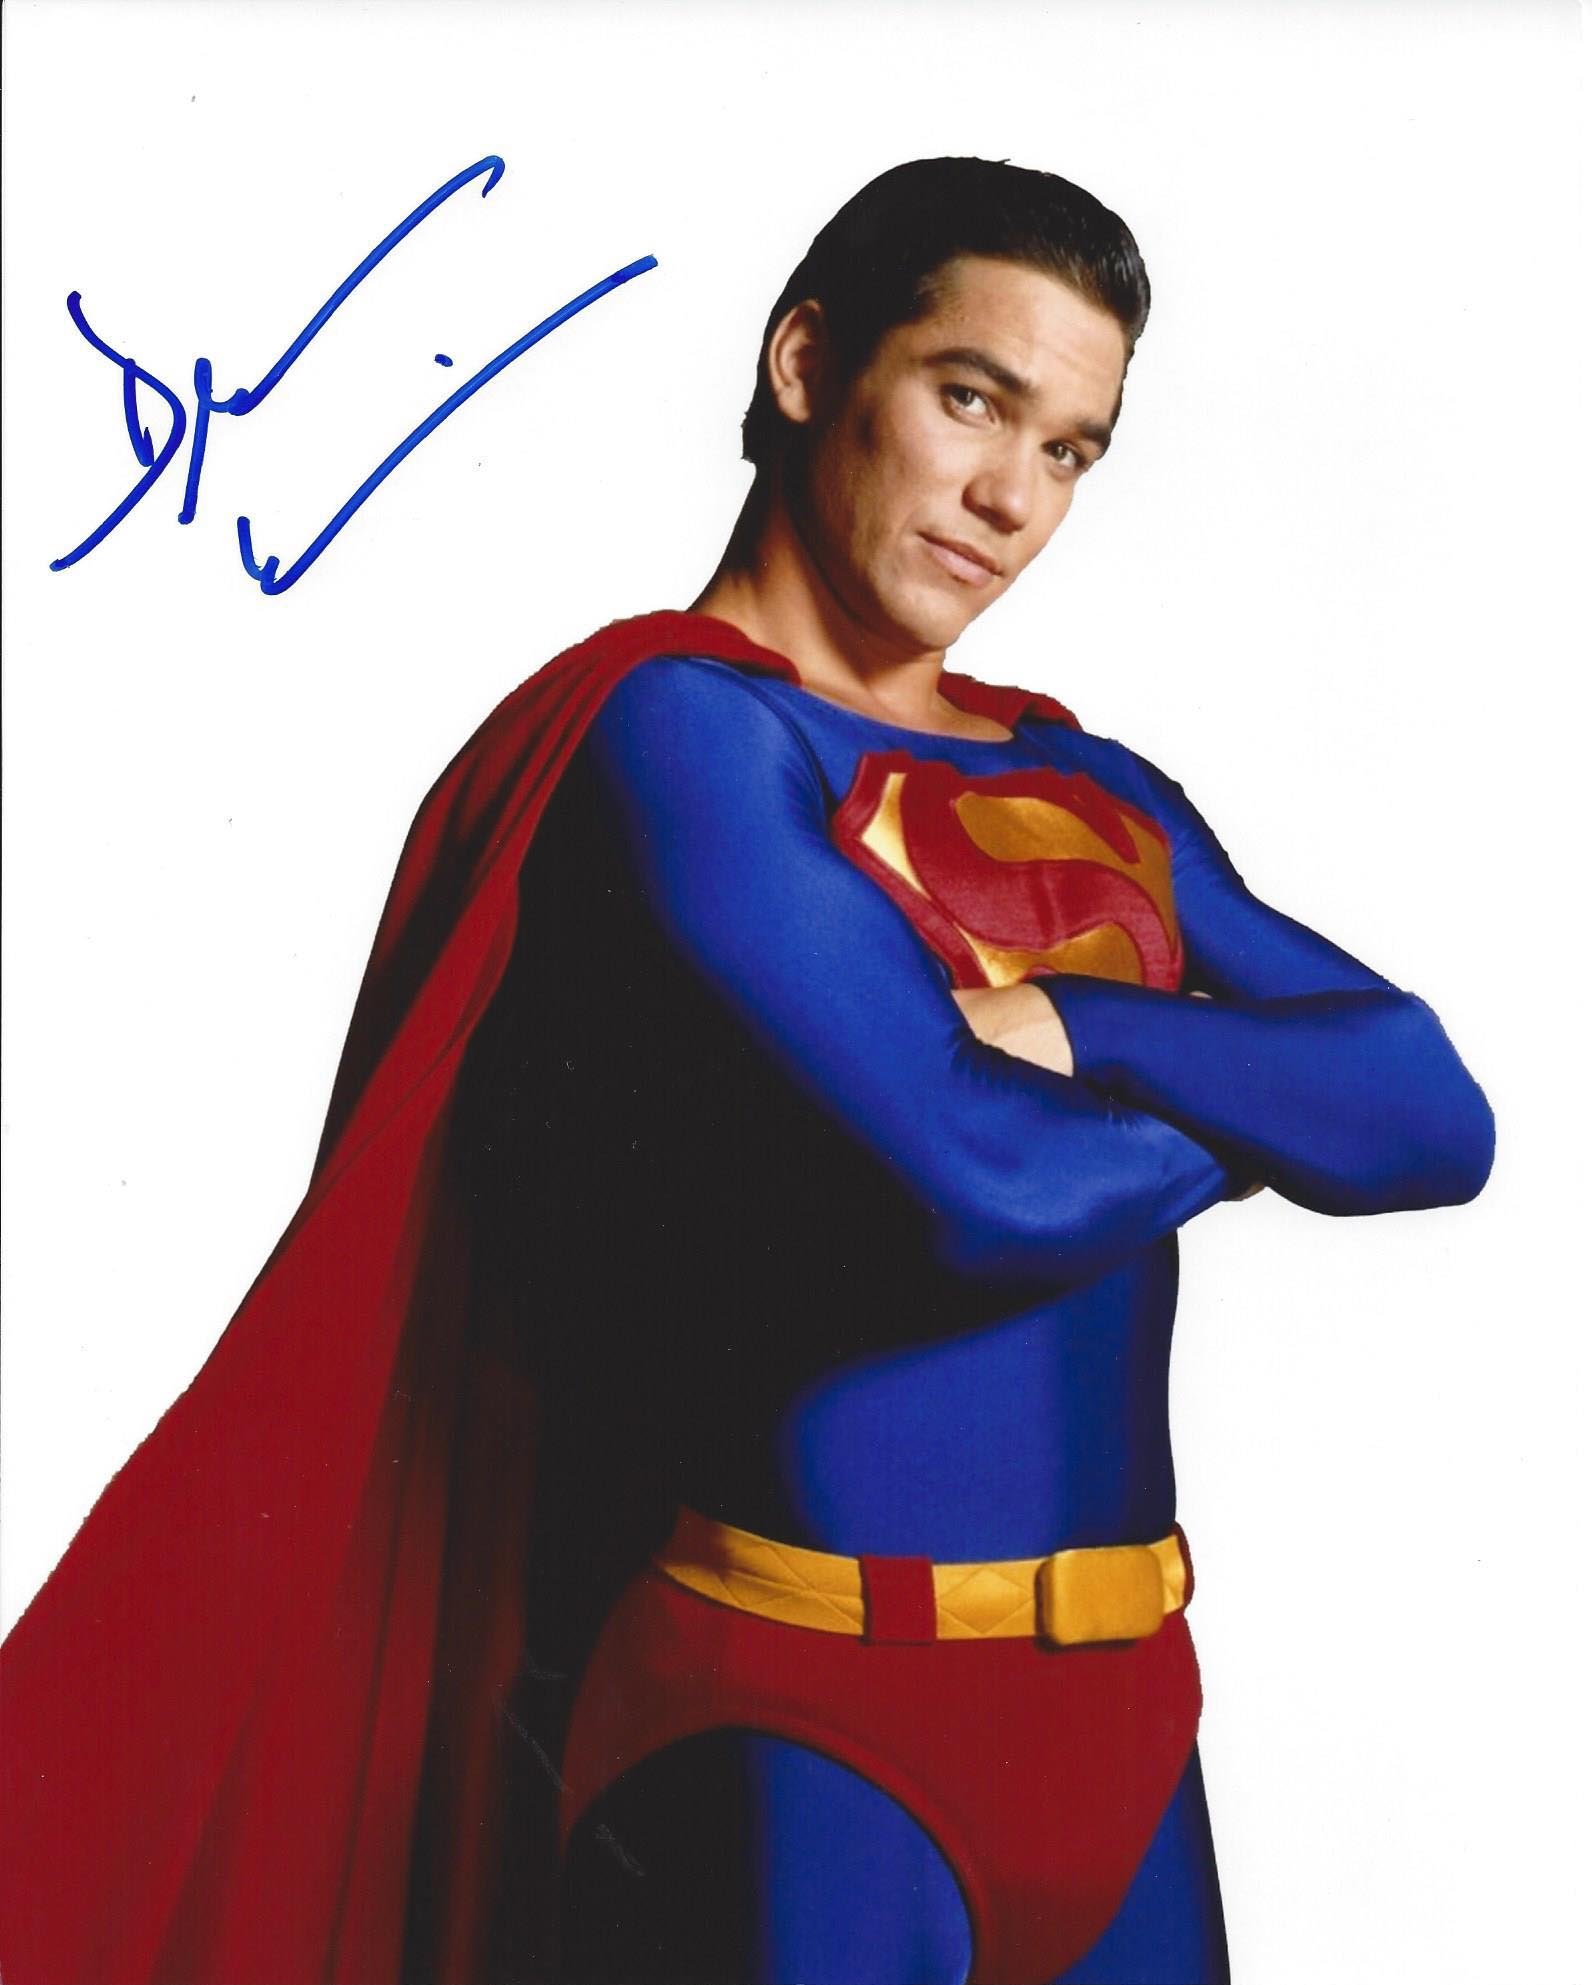 Dean Cain Superman signed 8x10 photo - Fanboy Expo Store.